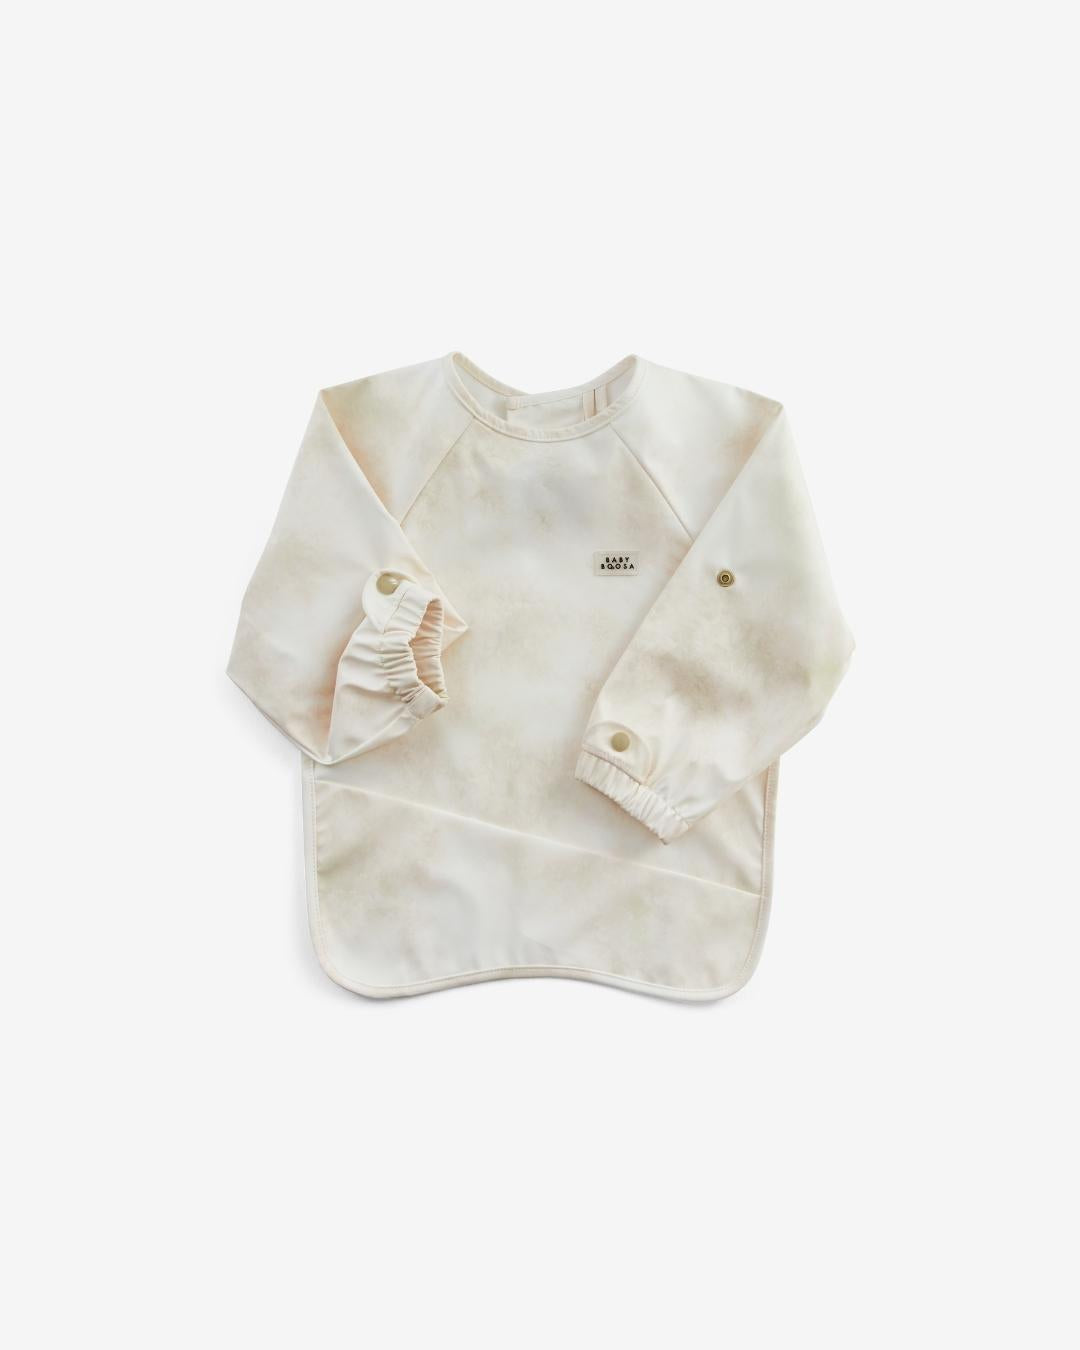 Comfort Fit Coverall Bib | Adjustable Neck &amp; Arms | Easy Clean | No-mess | Waterproof | Eco Recycled (Nude Tie Dye Print)